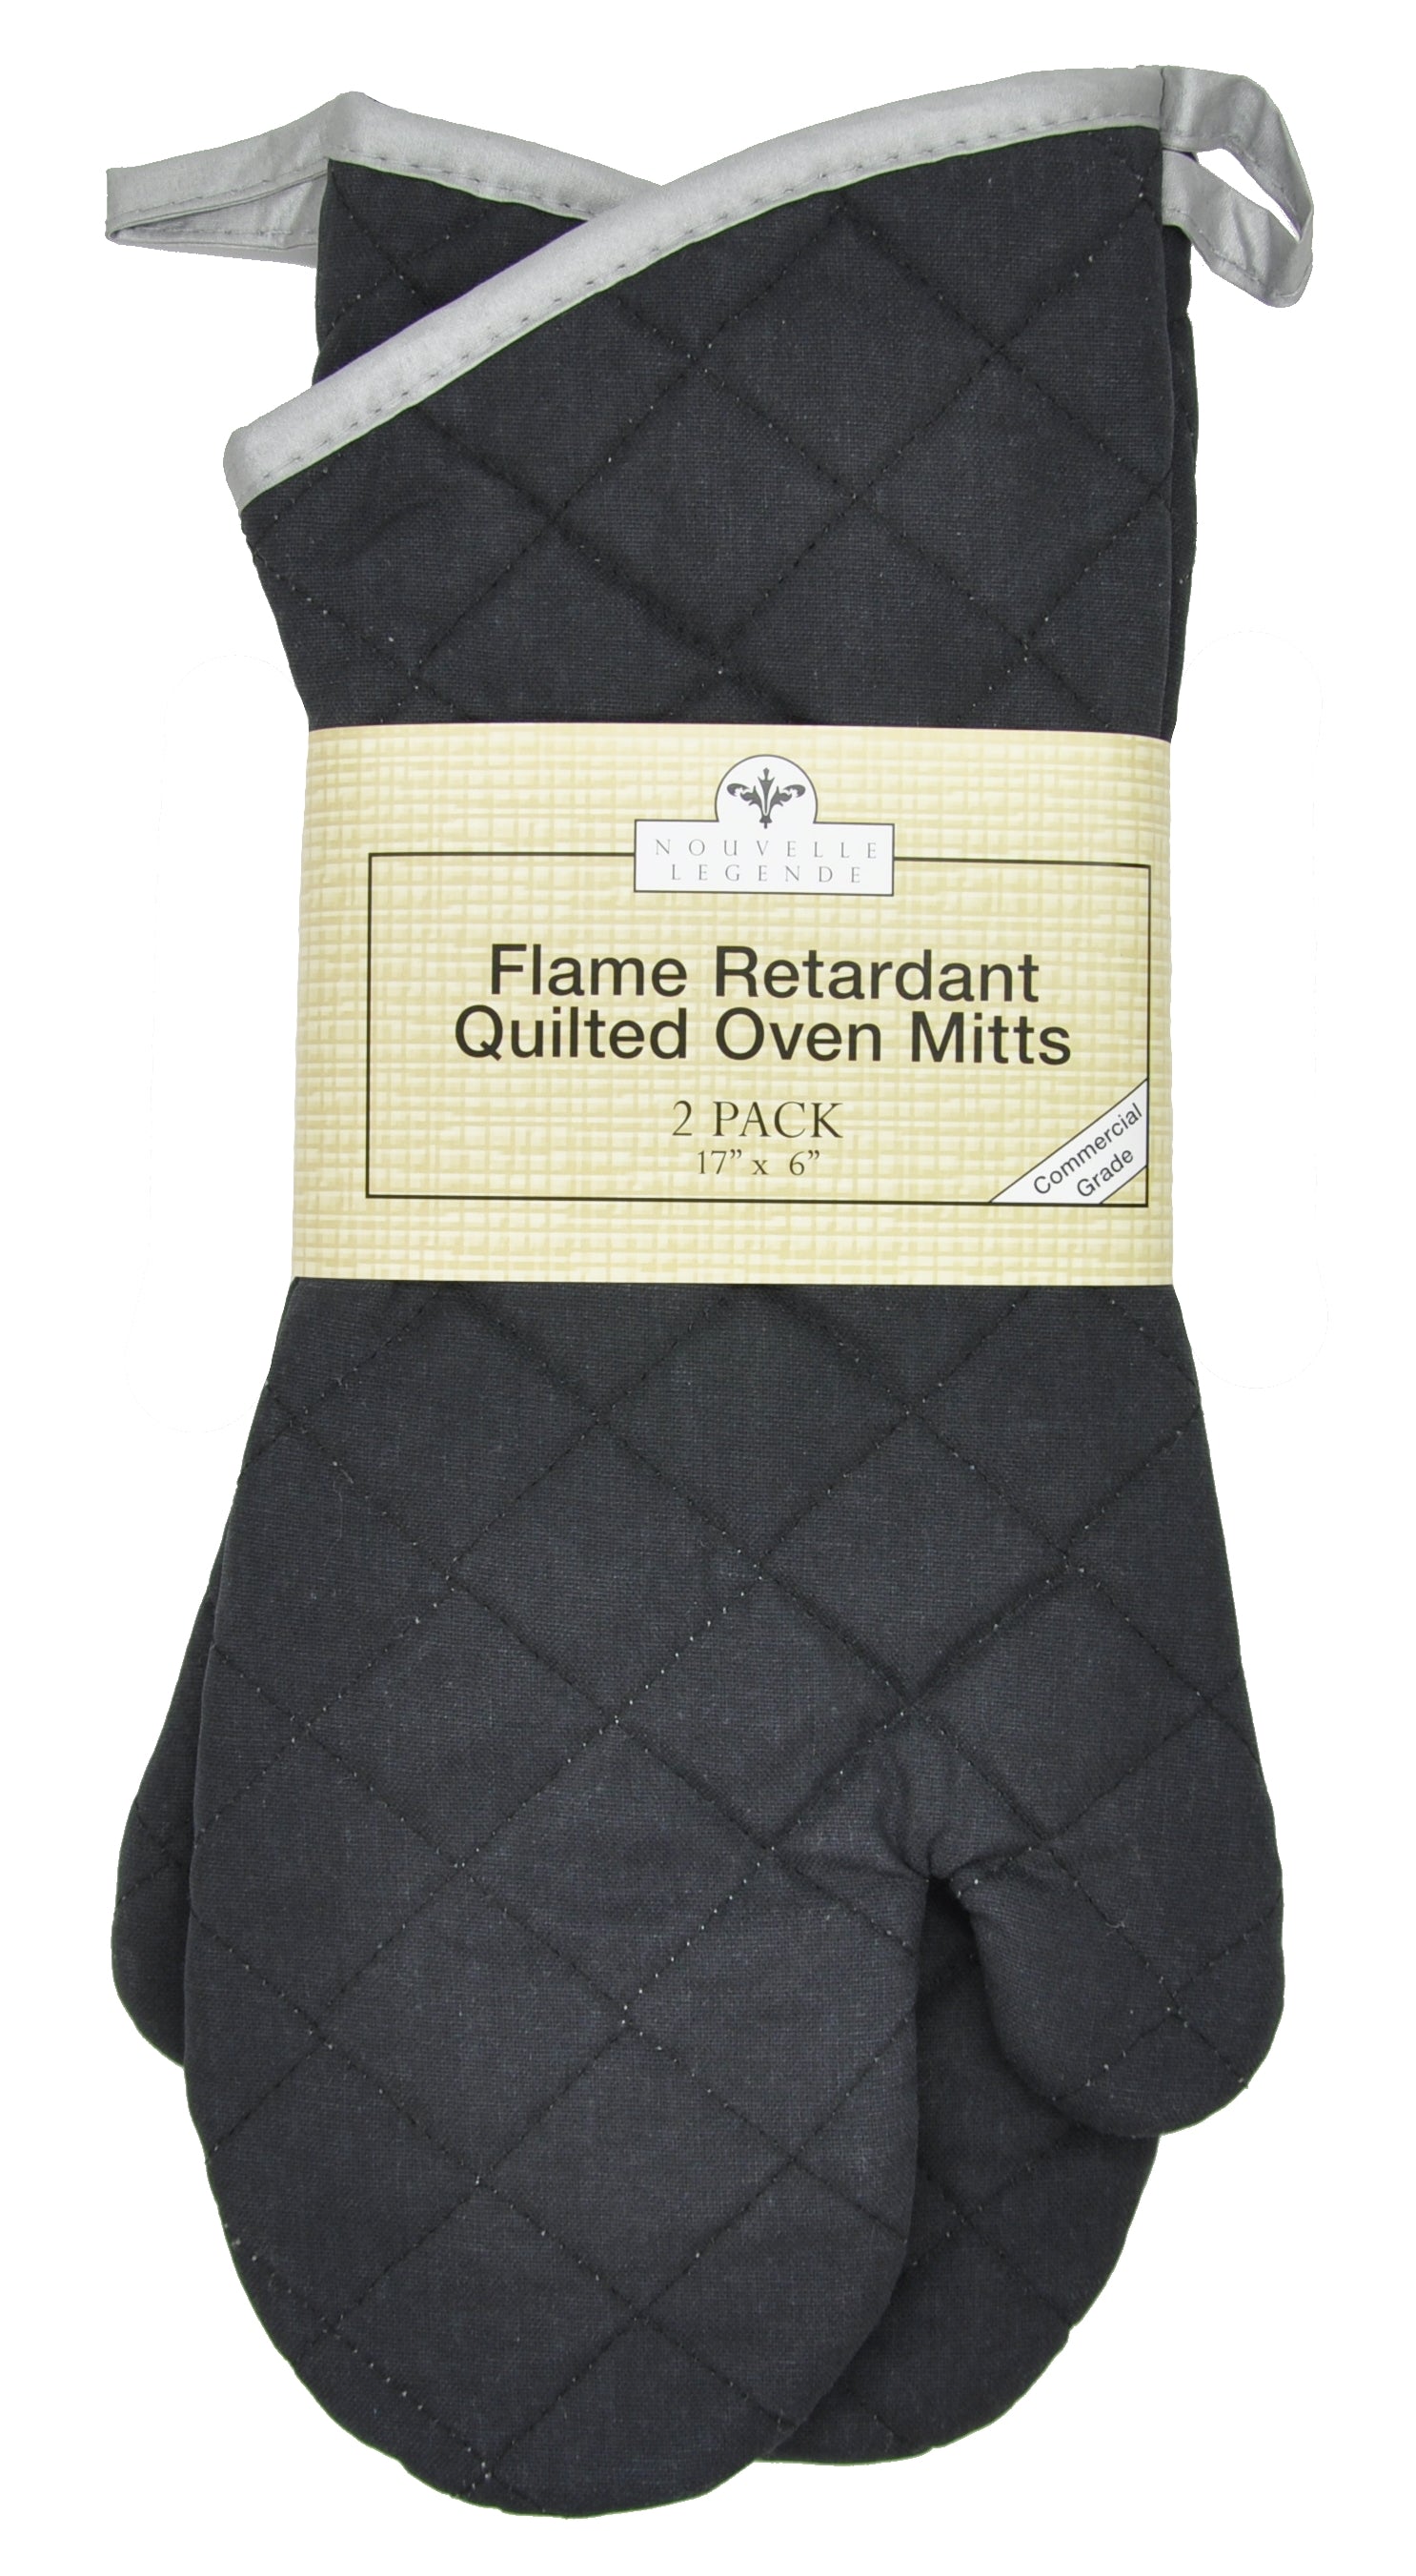  Folkulture Oven Mitts Heat Resistant 12 x 5.5 or